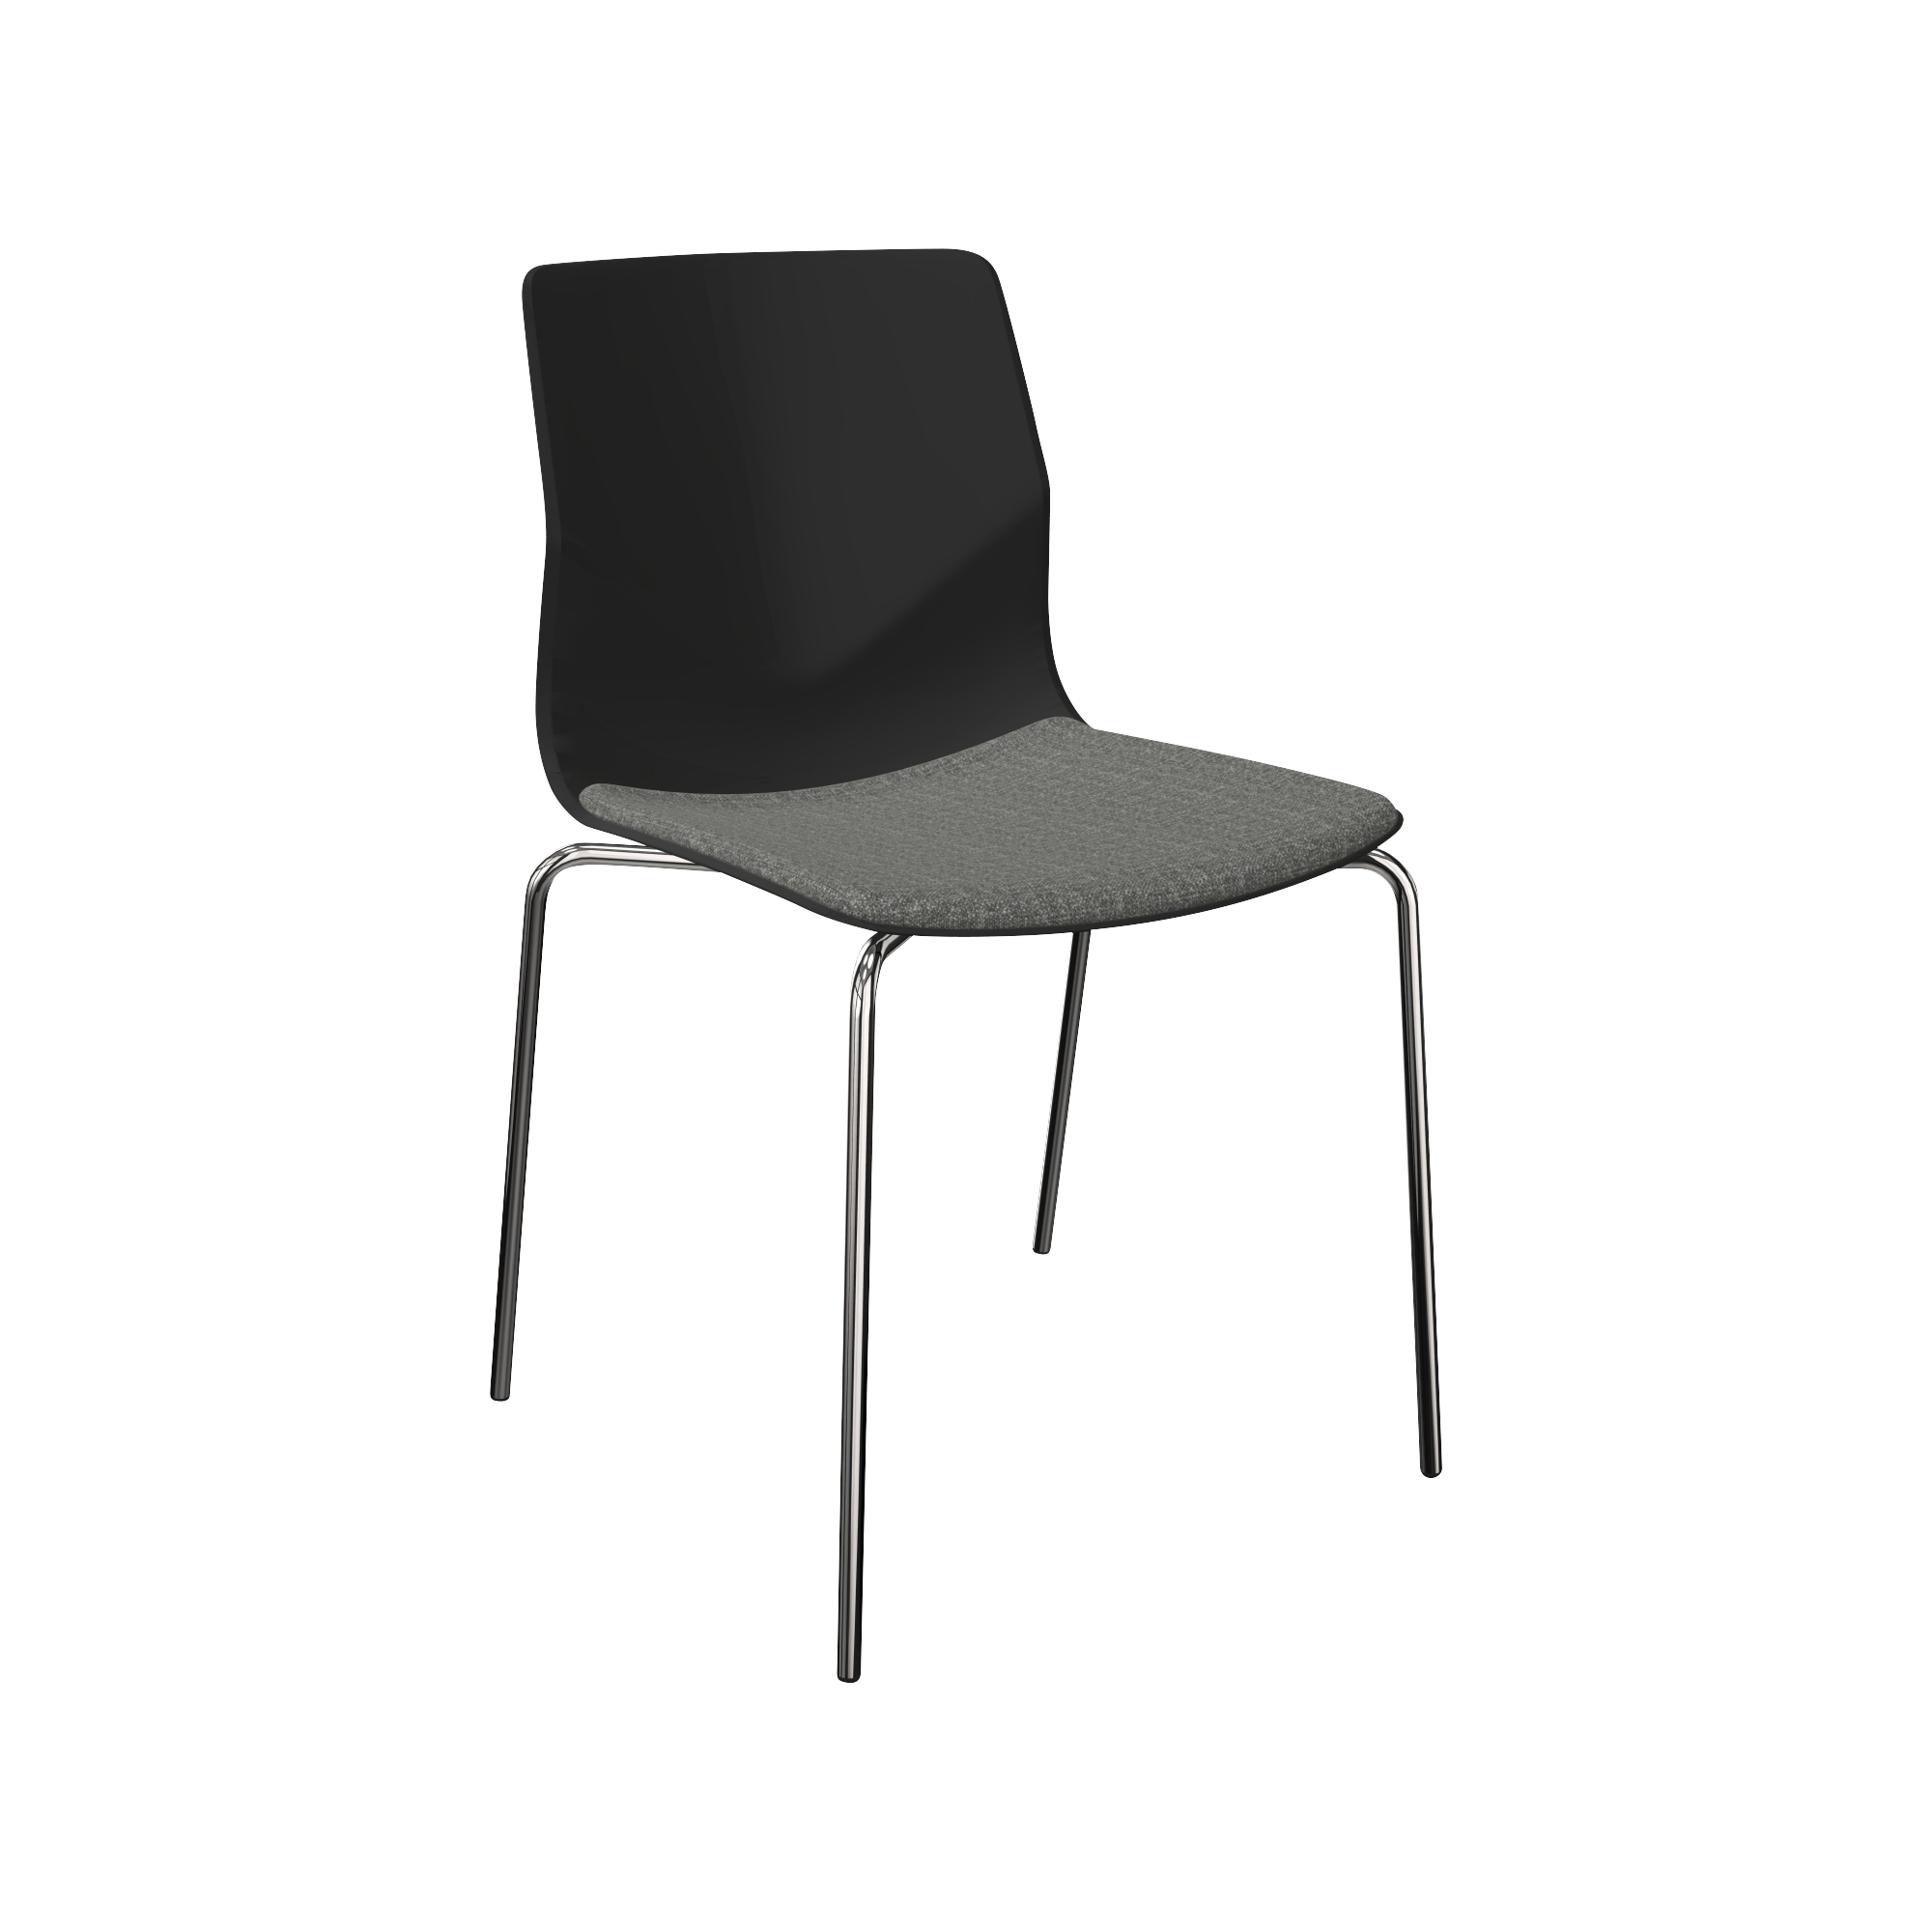 A grey upholstered chair